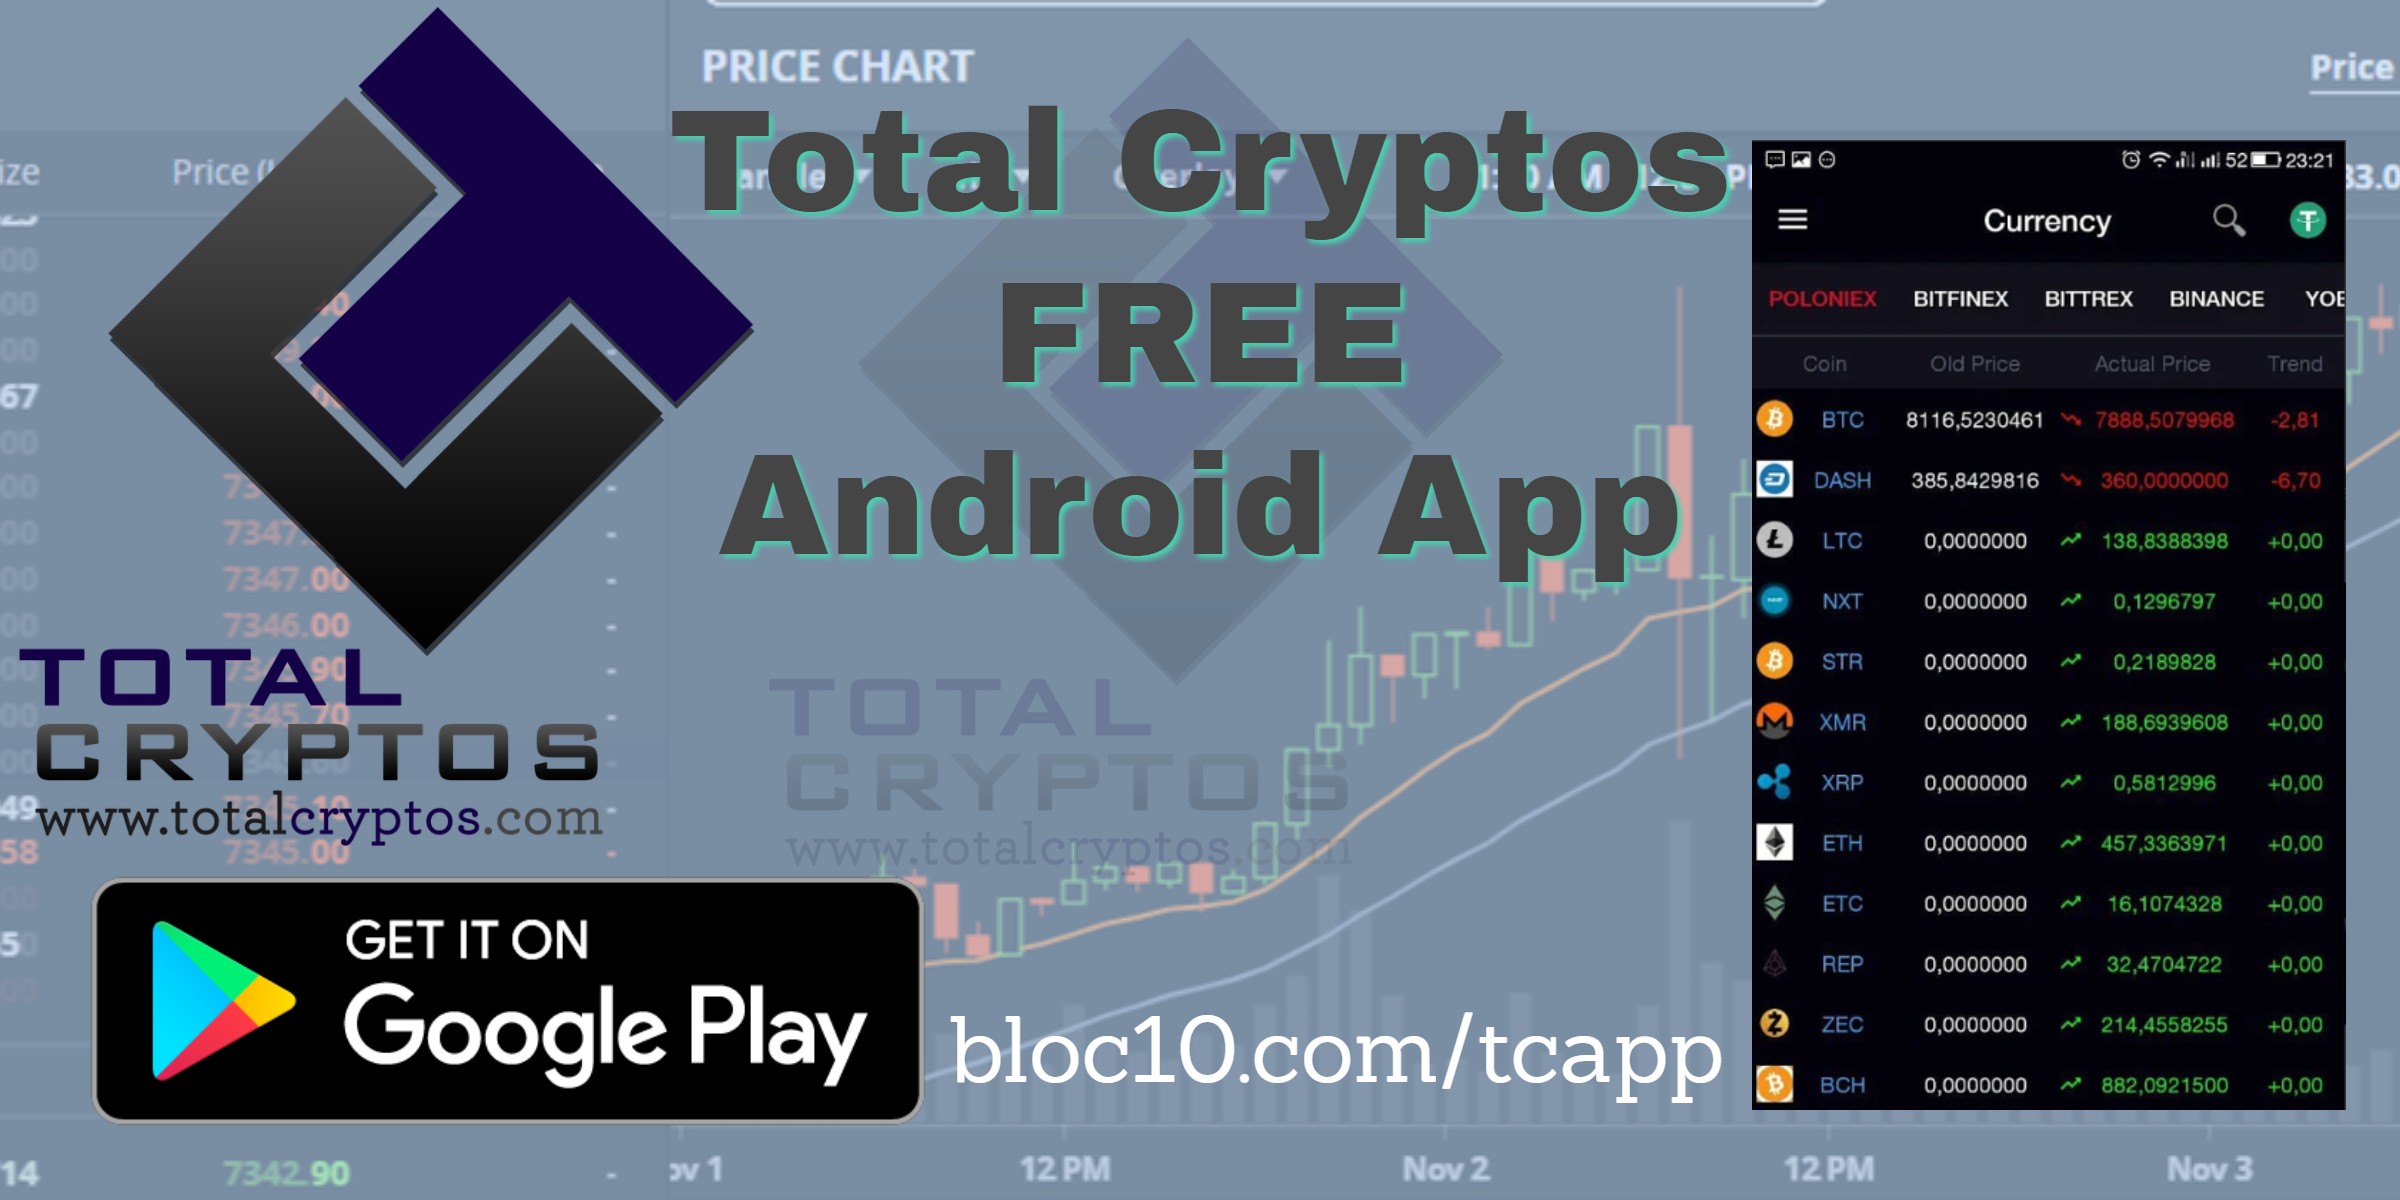 Free Android App Total Cryptos watch your favorite crypto currencies on your phone